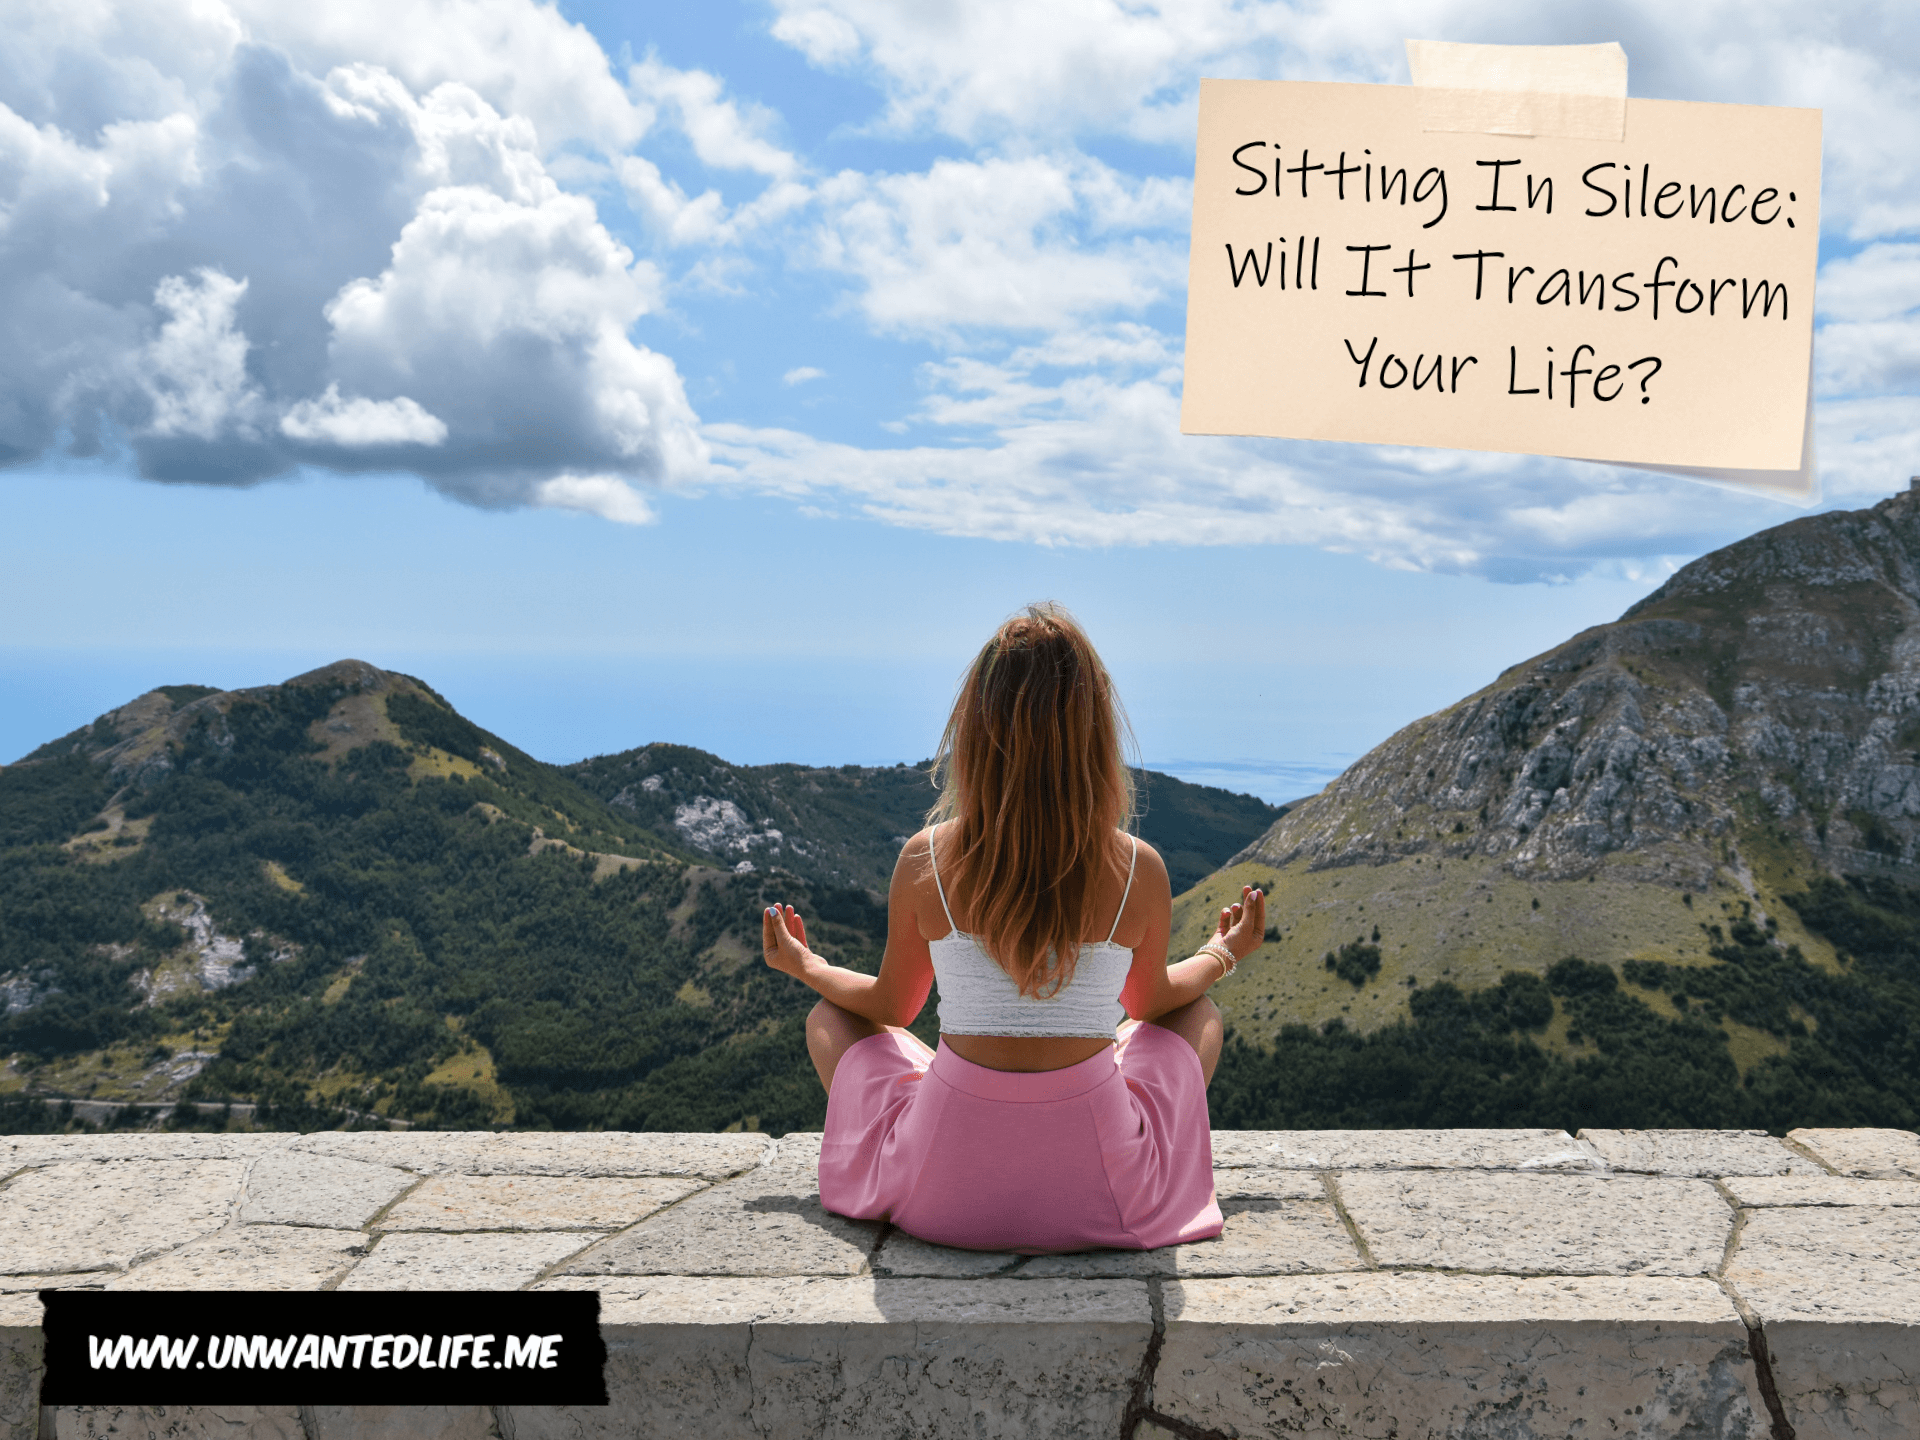 A photo of a young white woman sitting on a wall in a yoga pose overlooking a view of the countryside and mountains with the title of the article - Sitting In Silence: Will It Transform Your Life - in the top right corner of the image